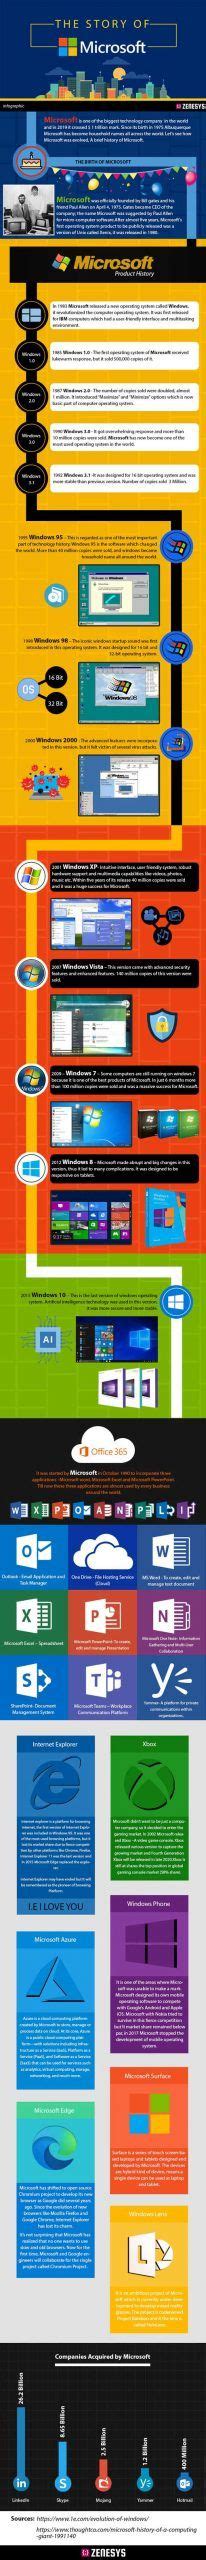 The Story Of Microsoft Infographic